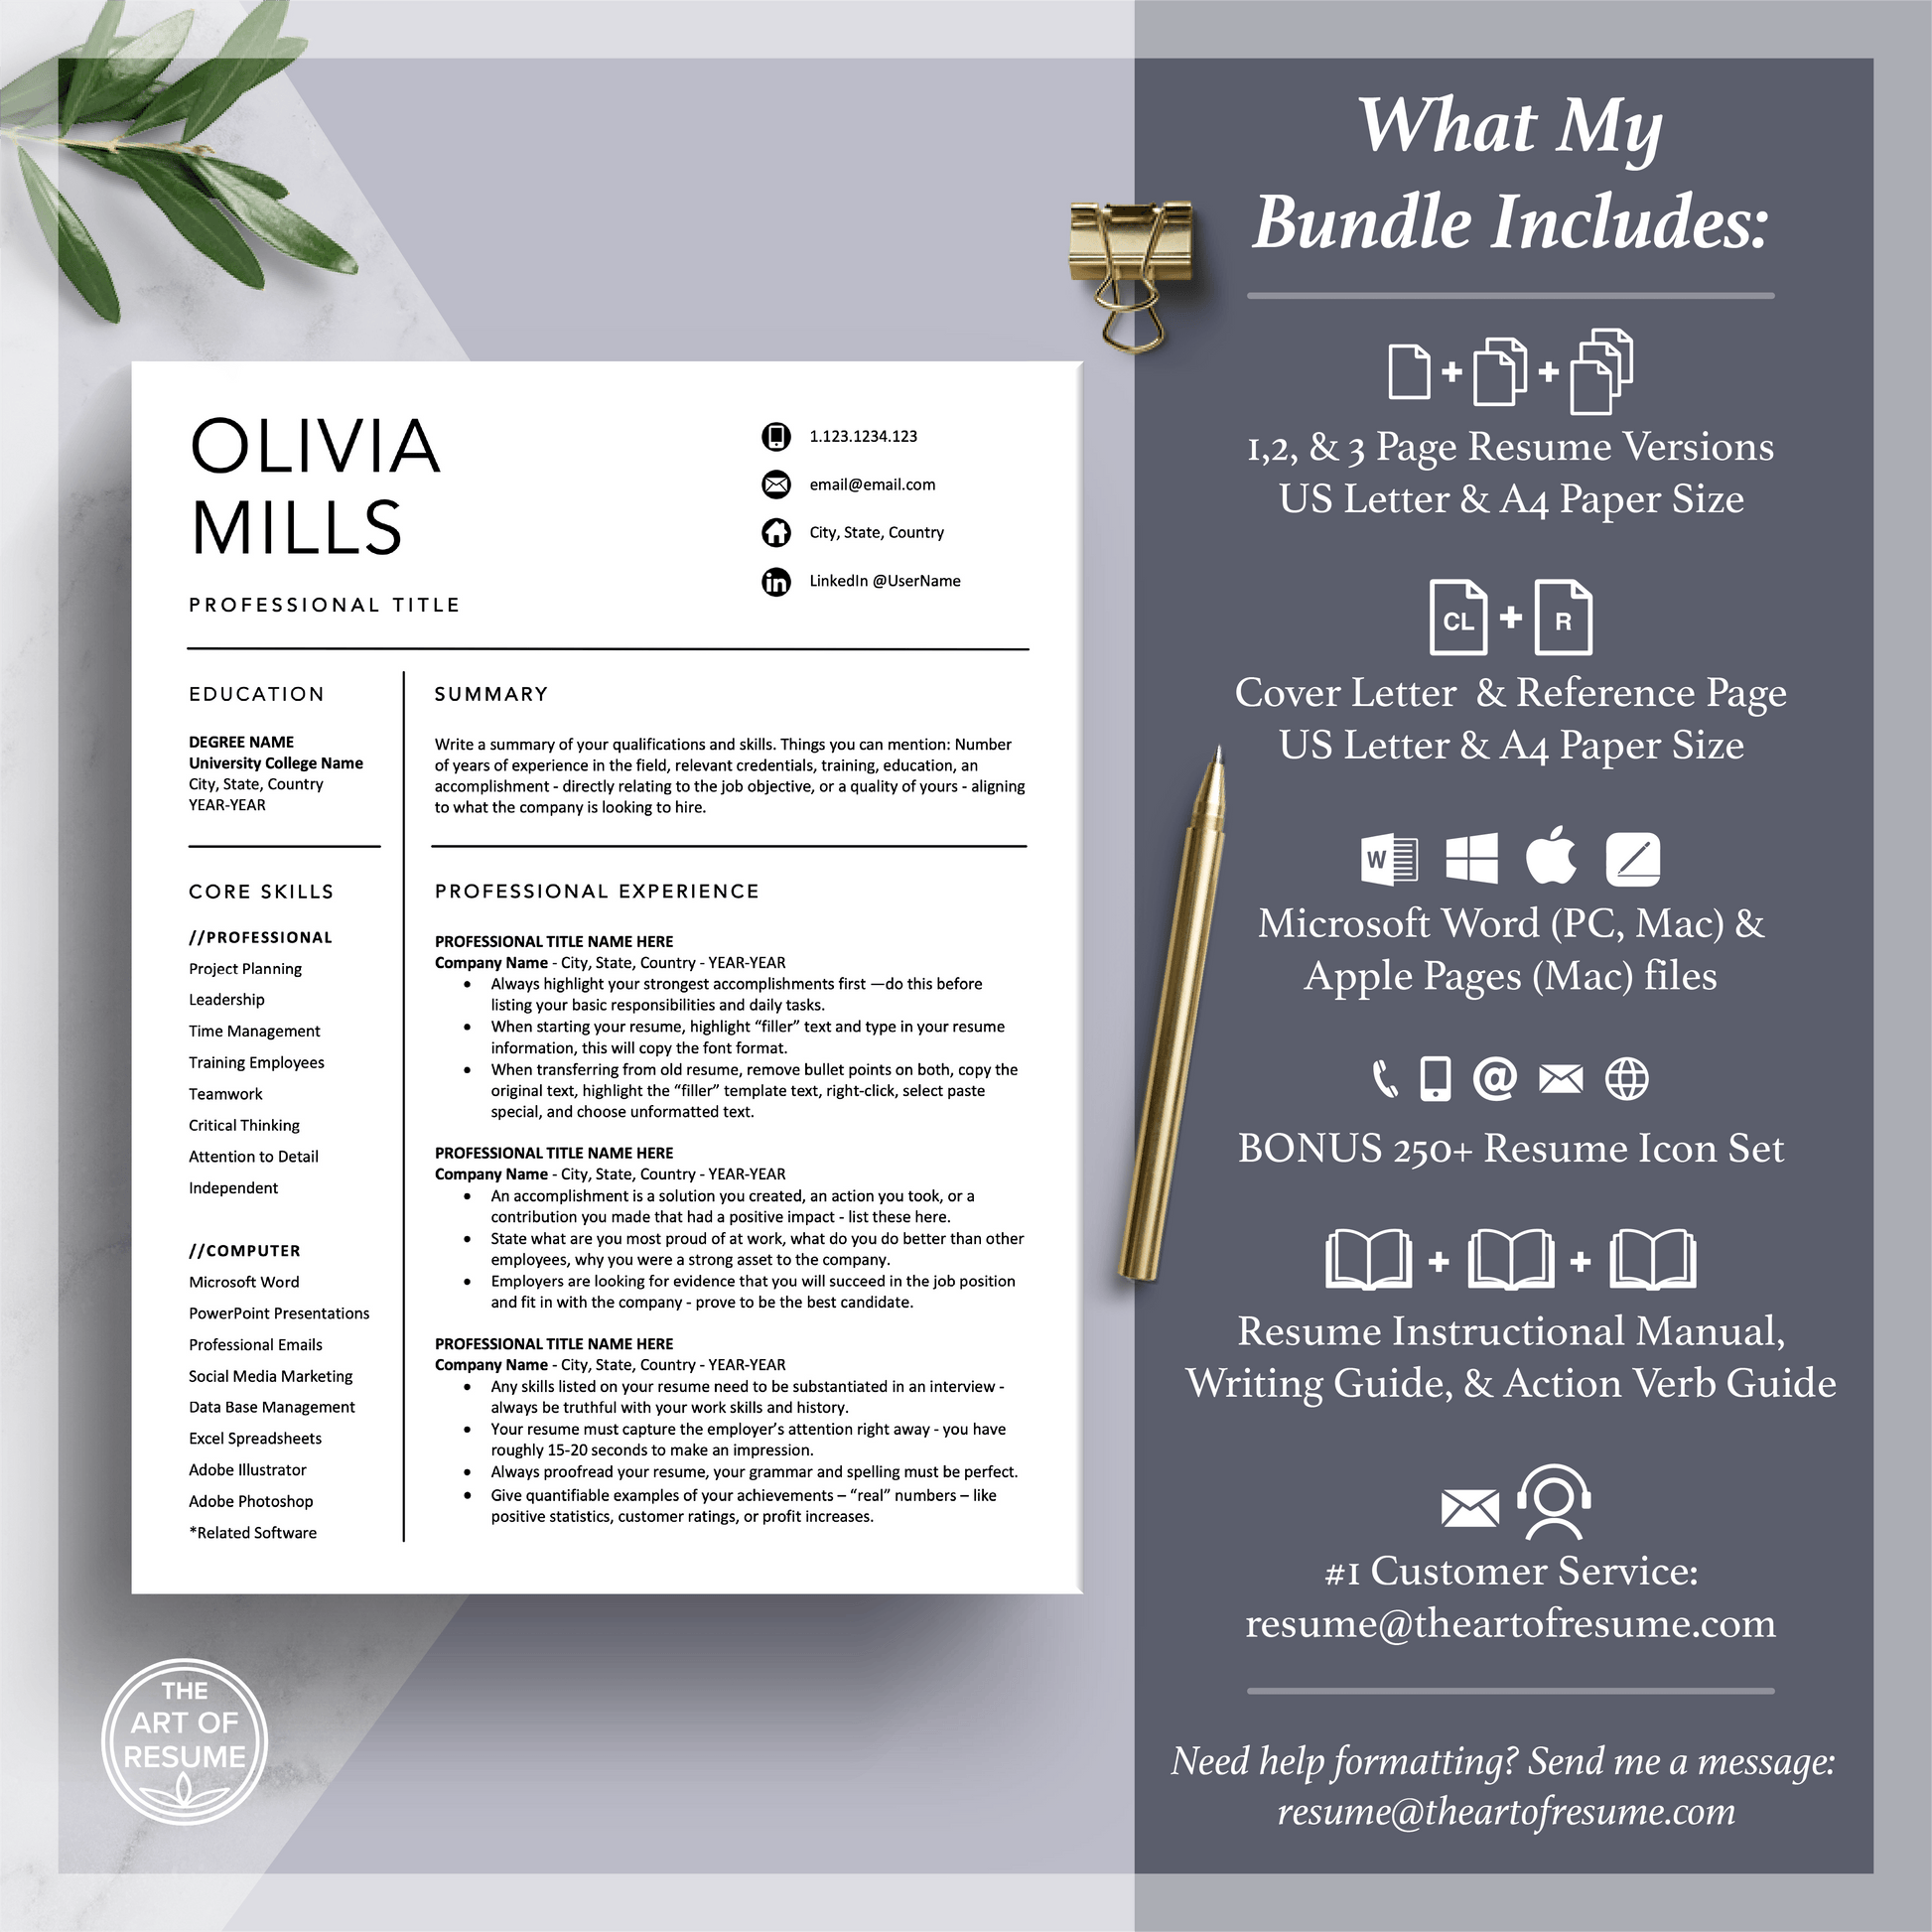 Simple Resume | Modern Template [Fast & Easy] - The Art of Resume